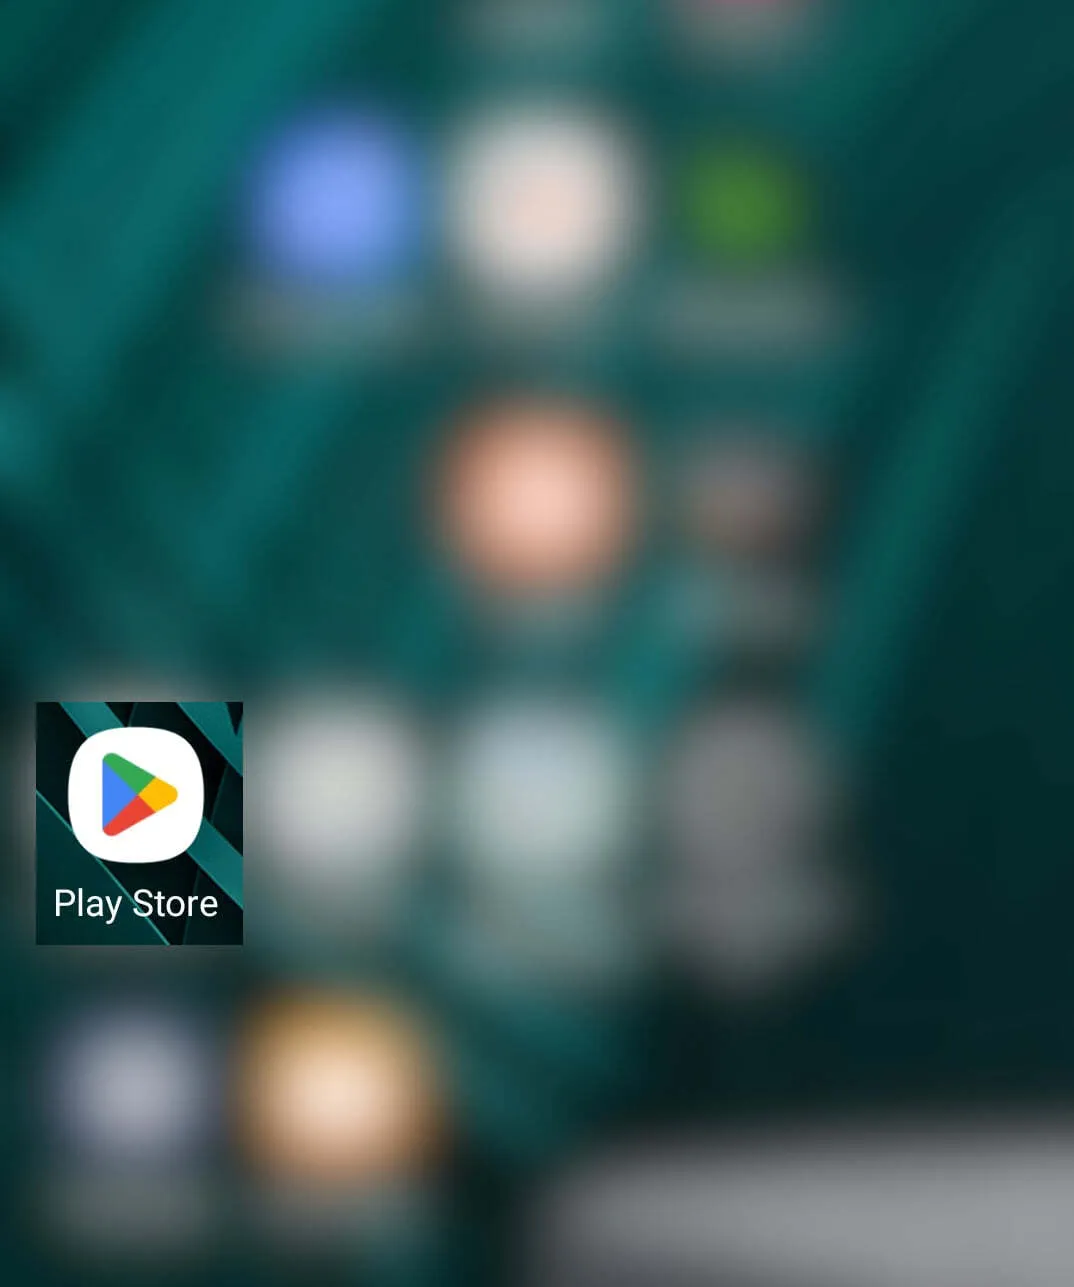 Look for Play Store on the home screen in Android